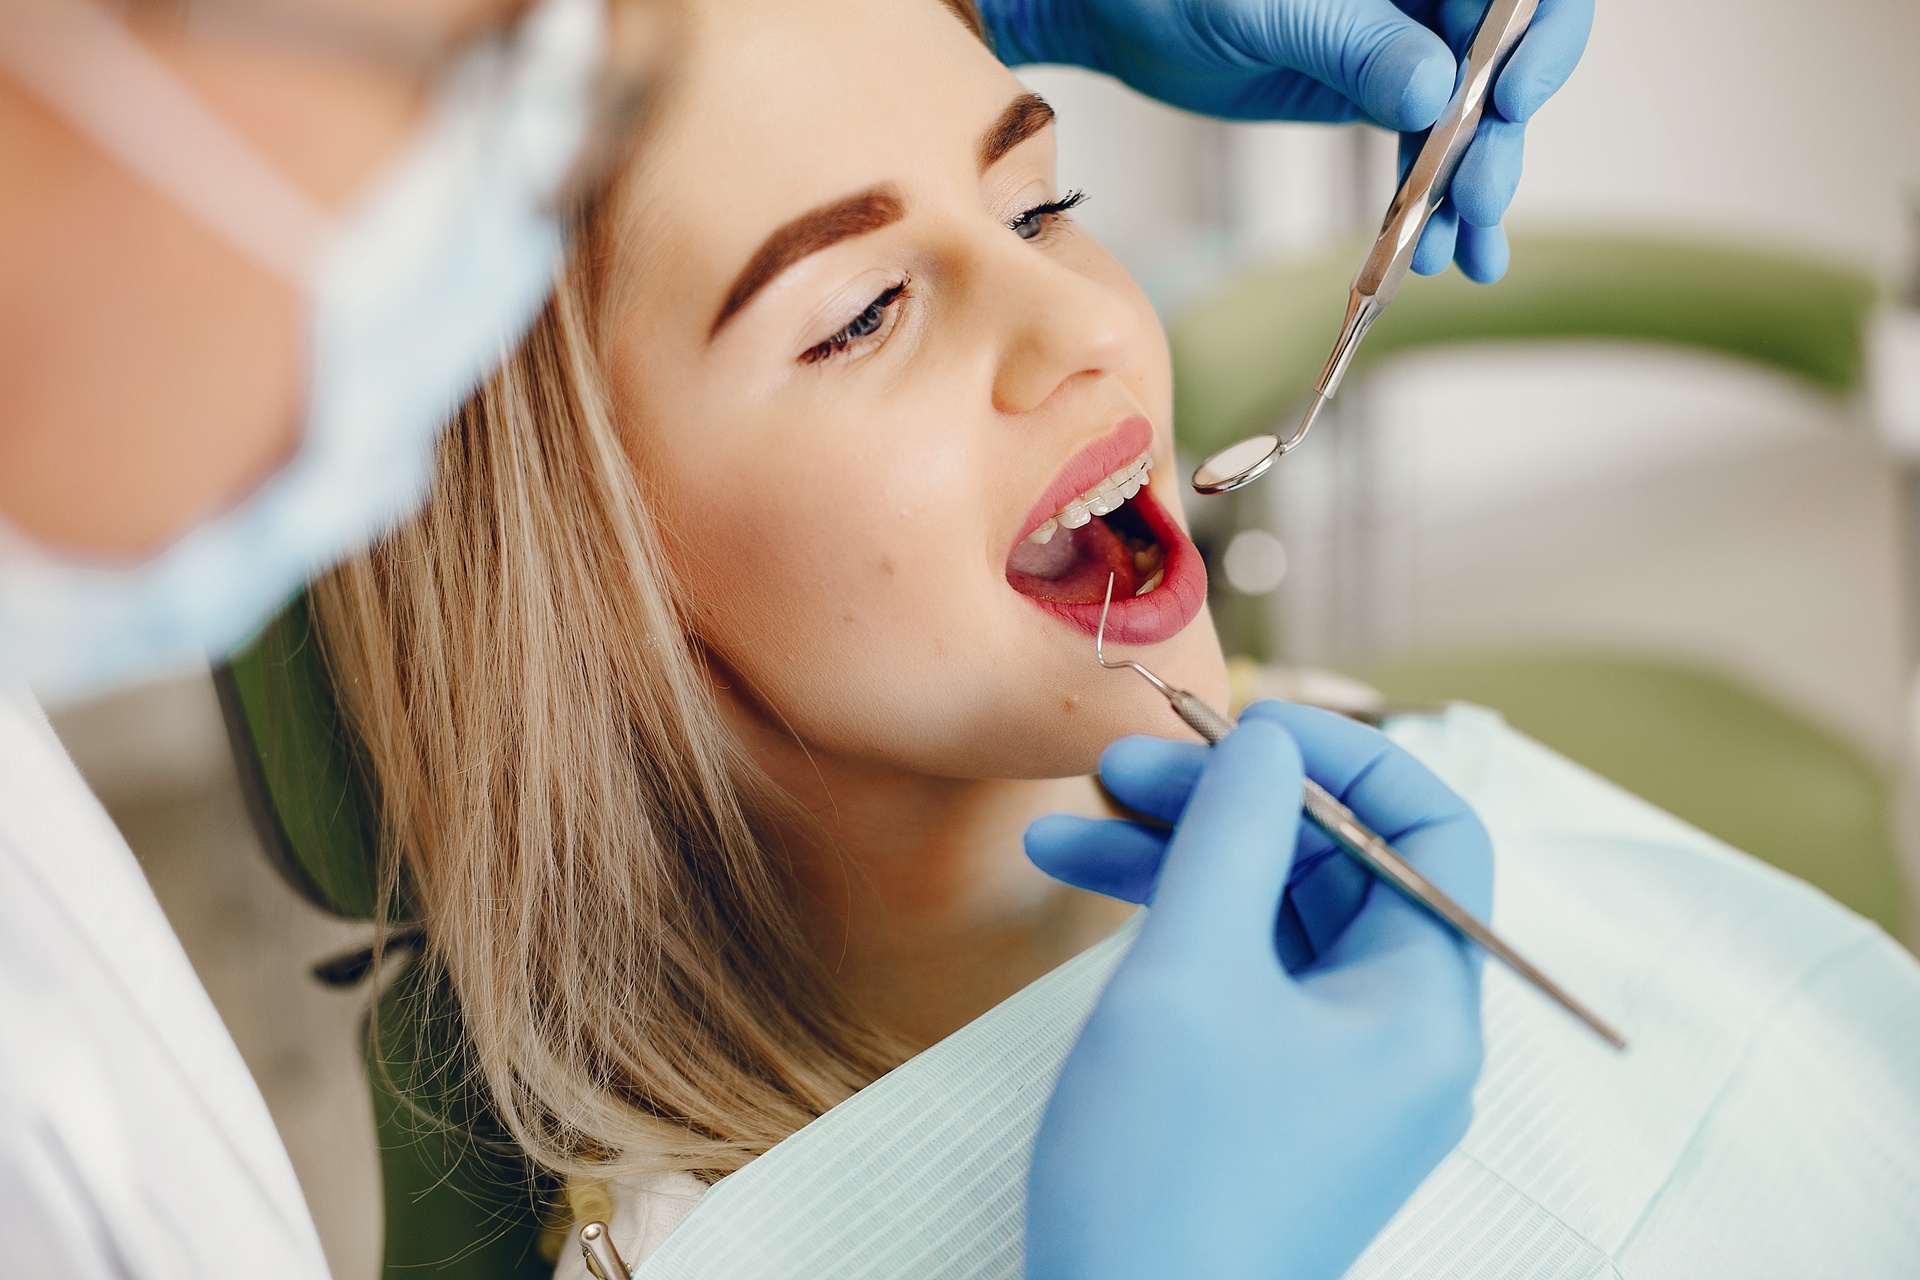 Complication Insure covers expenses related to problems that could be associated with dental procedures.